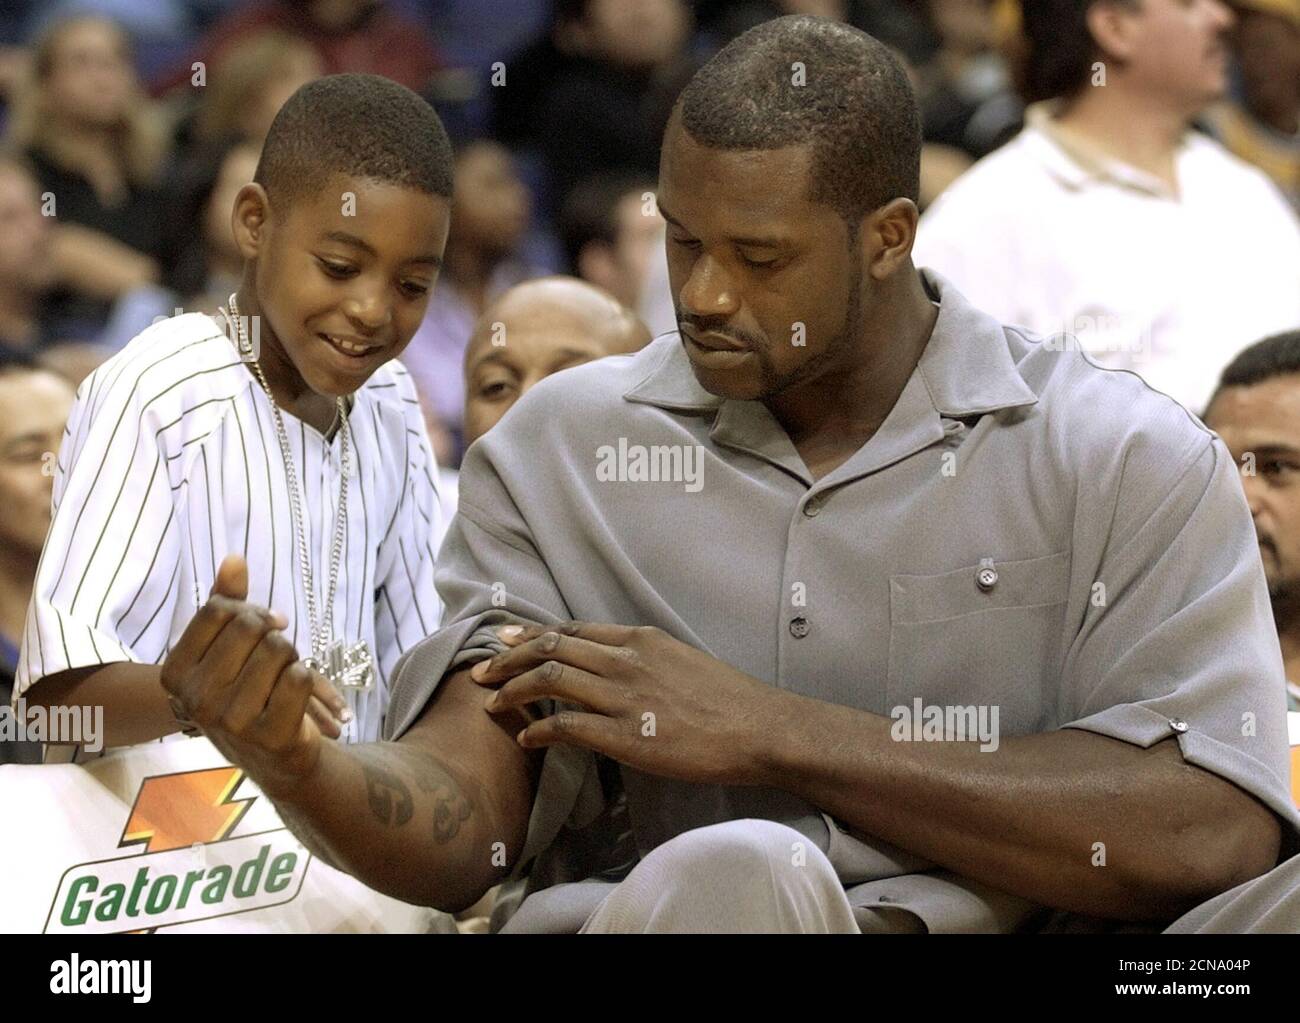 Los Angeles Lakers center Shaquille O'Neal (R) shows a young fan his  tattoos, as he sits out the game on the bench with an injured heel, during  their NBA pre-season game against